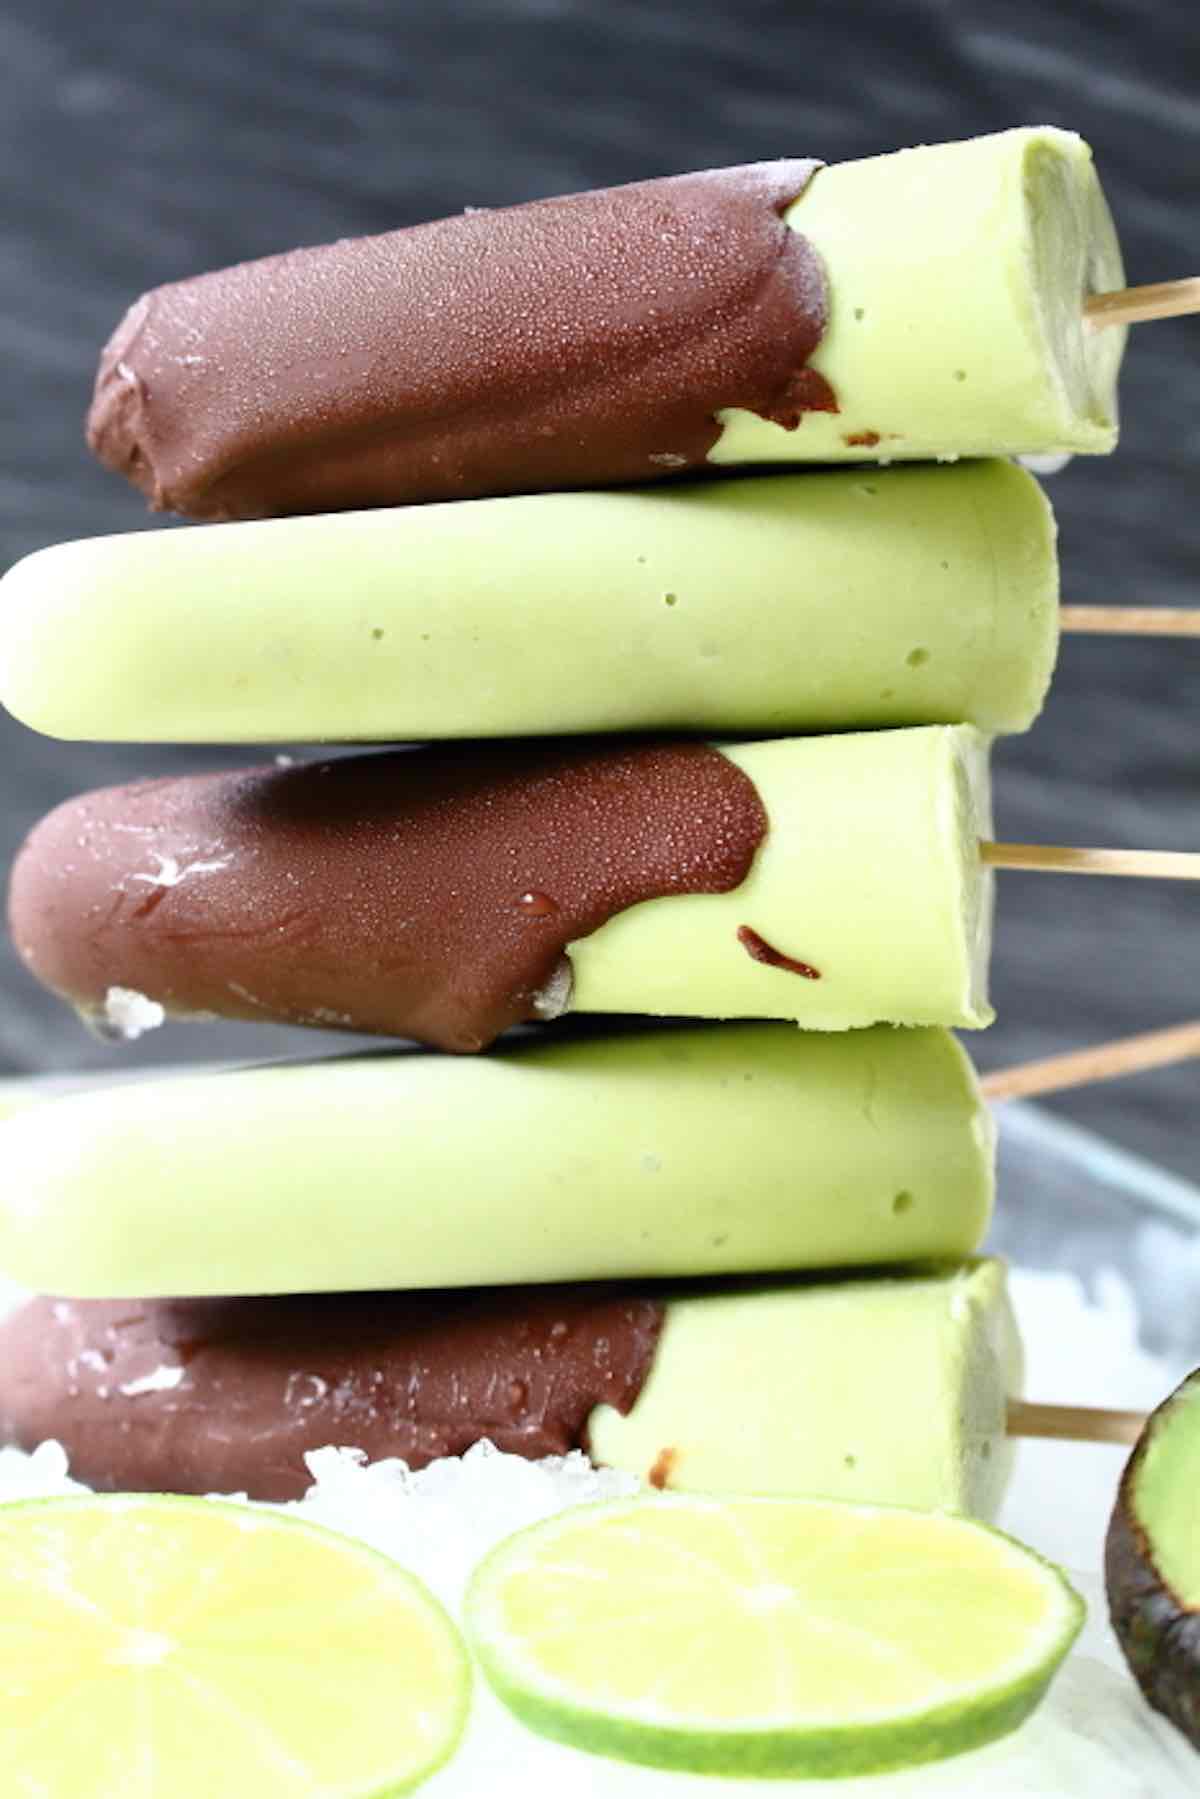 keto popsicles with chocolate coating.